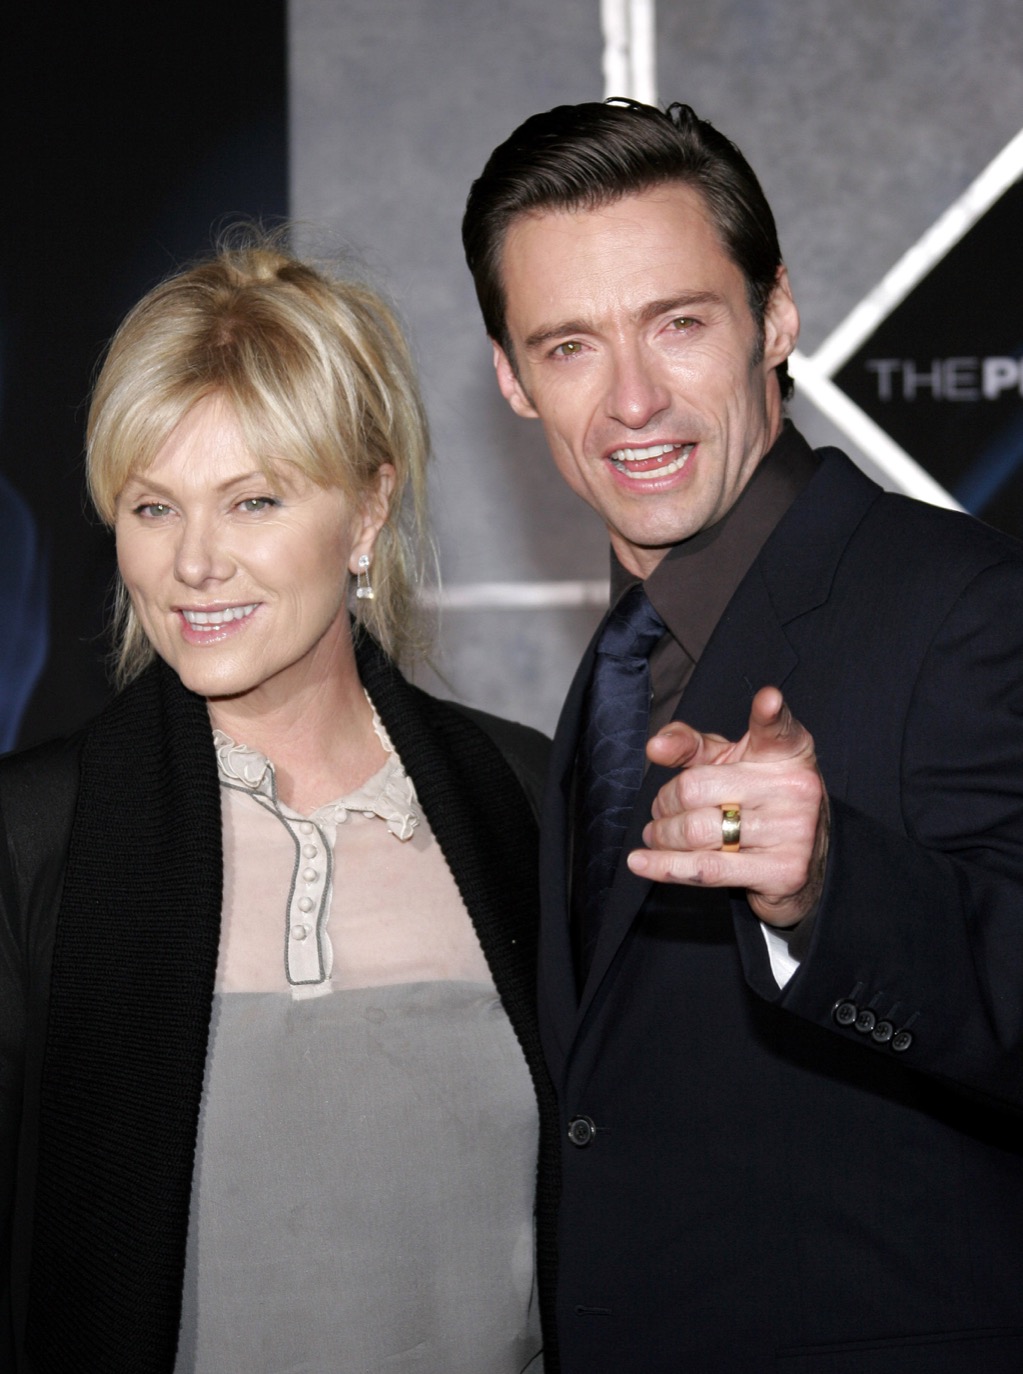 Hugh Jackman hits the red carpet with his wife, Deborra-Lee Furness.